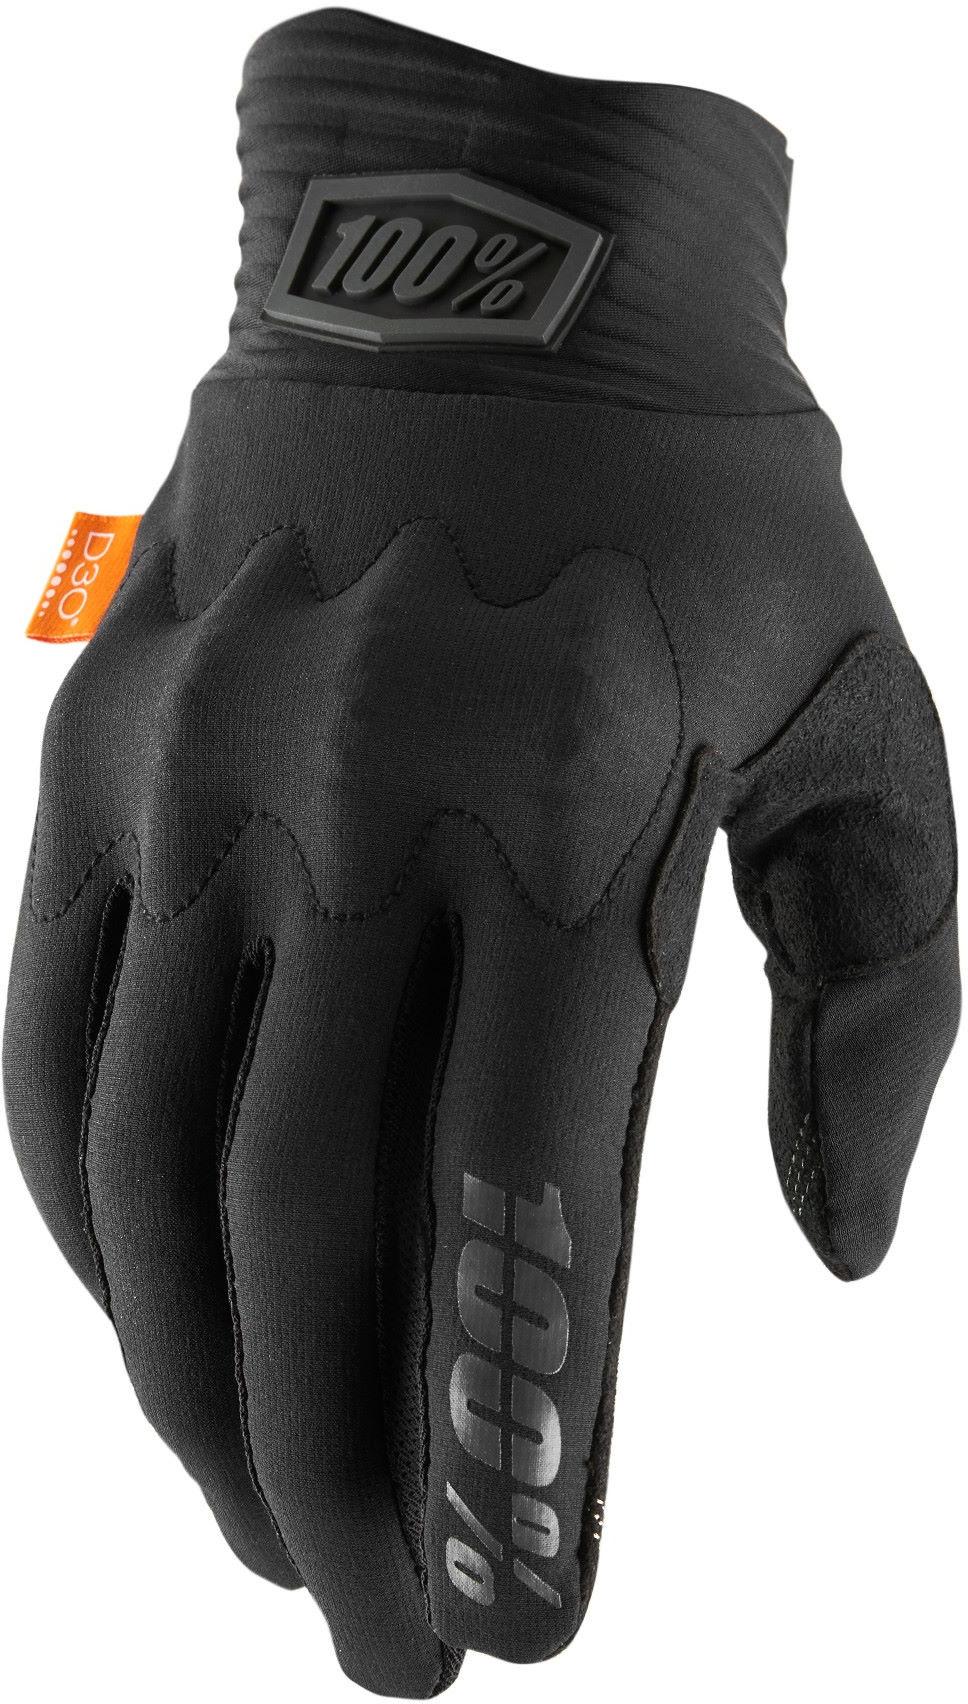 100% Cognito D3o Gloves - Black/charcoal